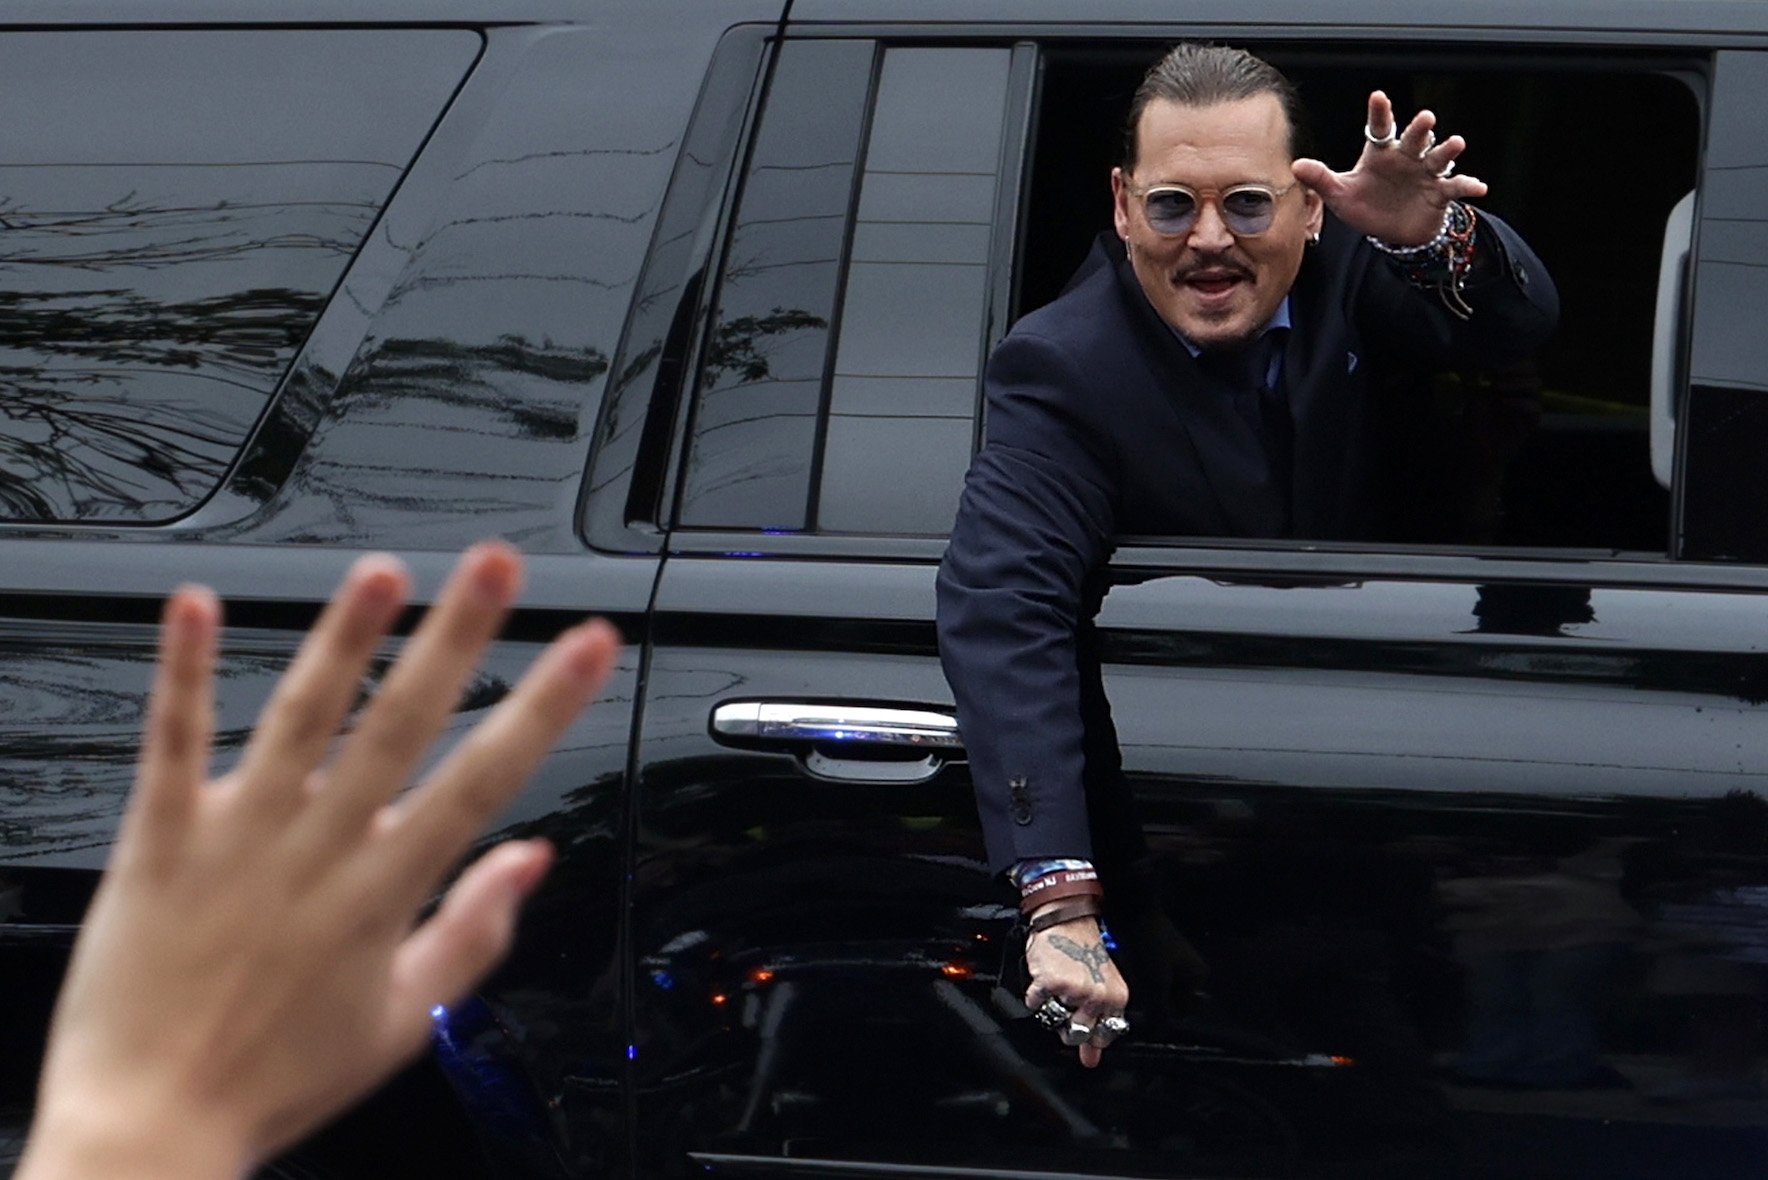 Johnny Depp waves to supporters from his car after the trial with Amber Heard